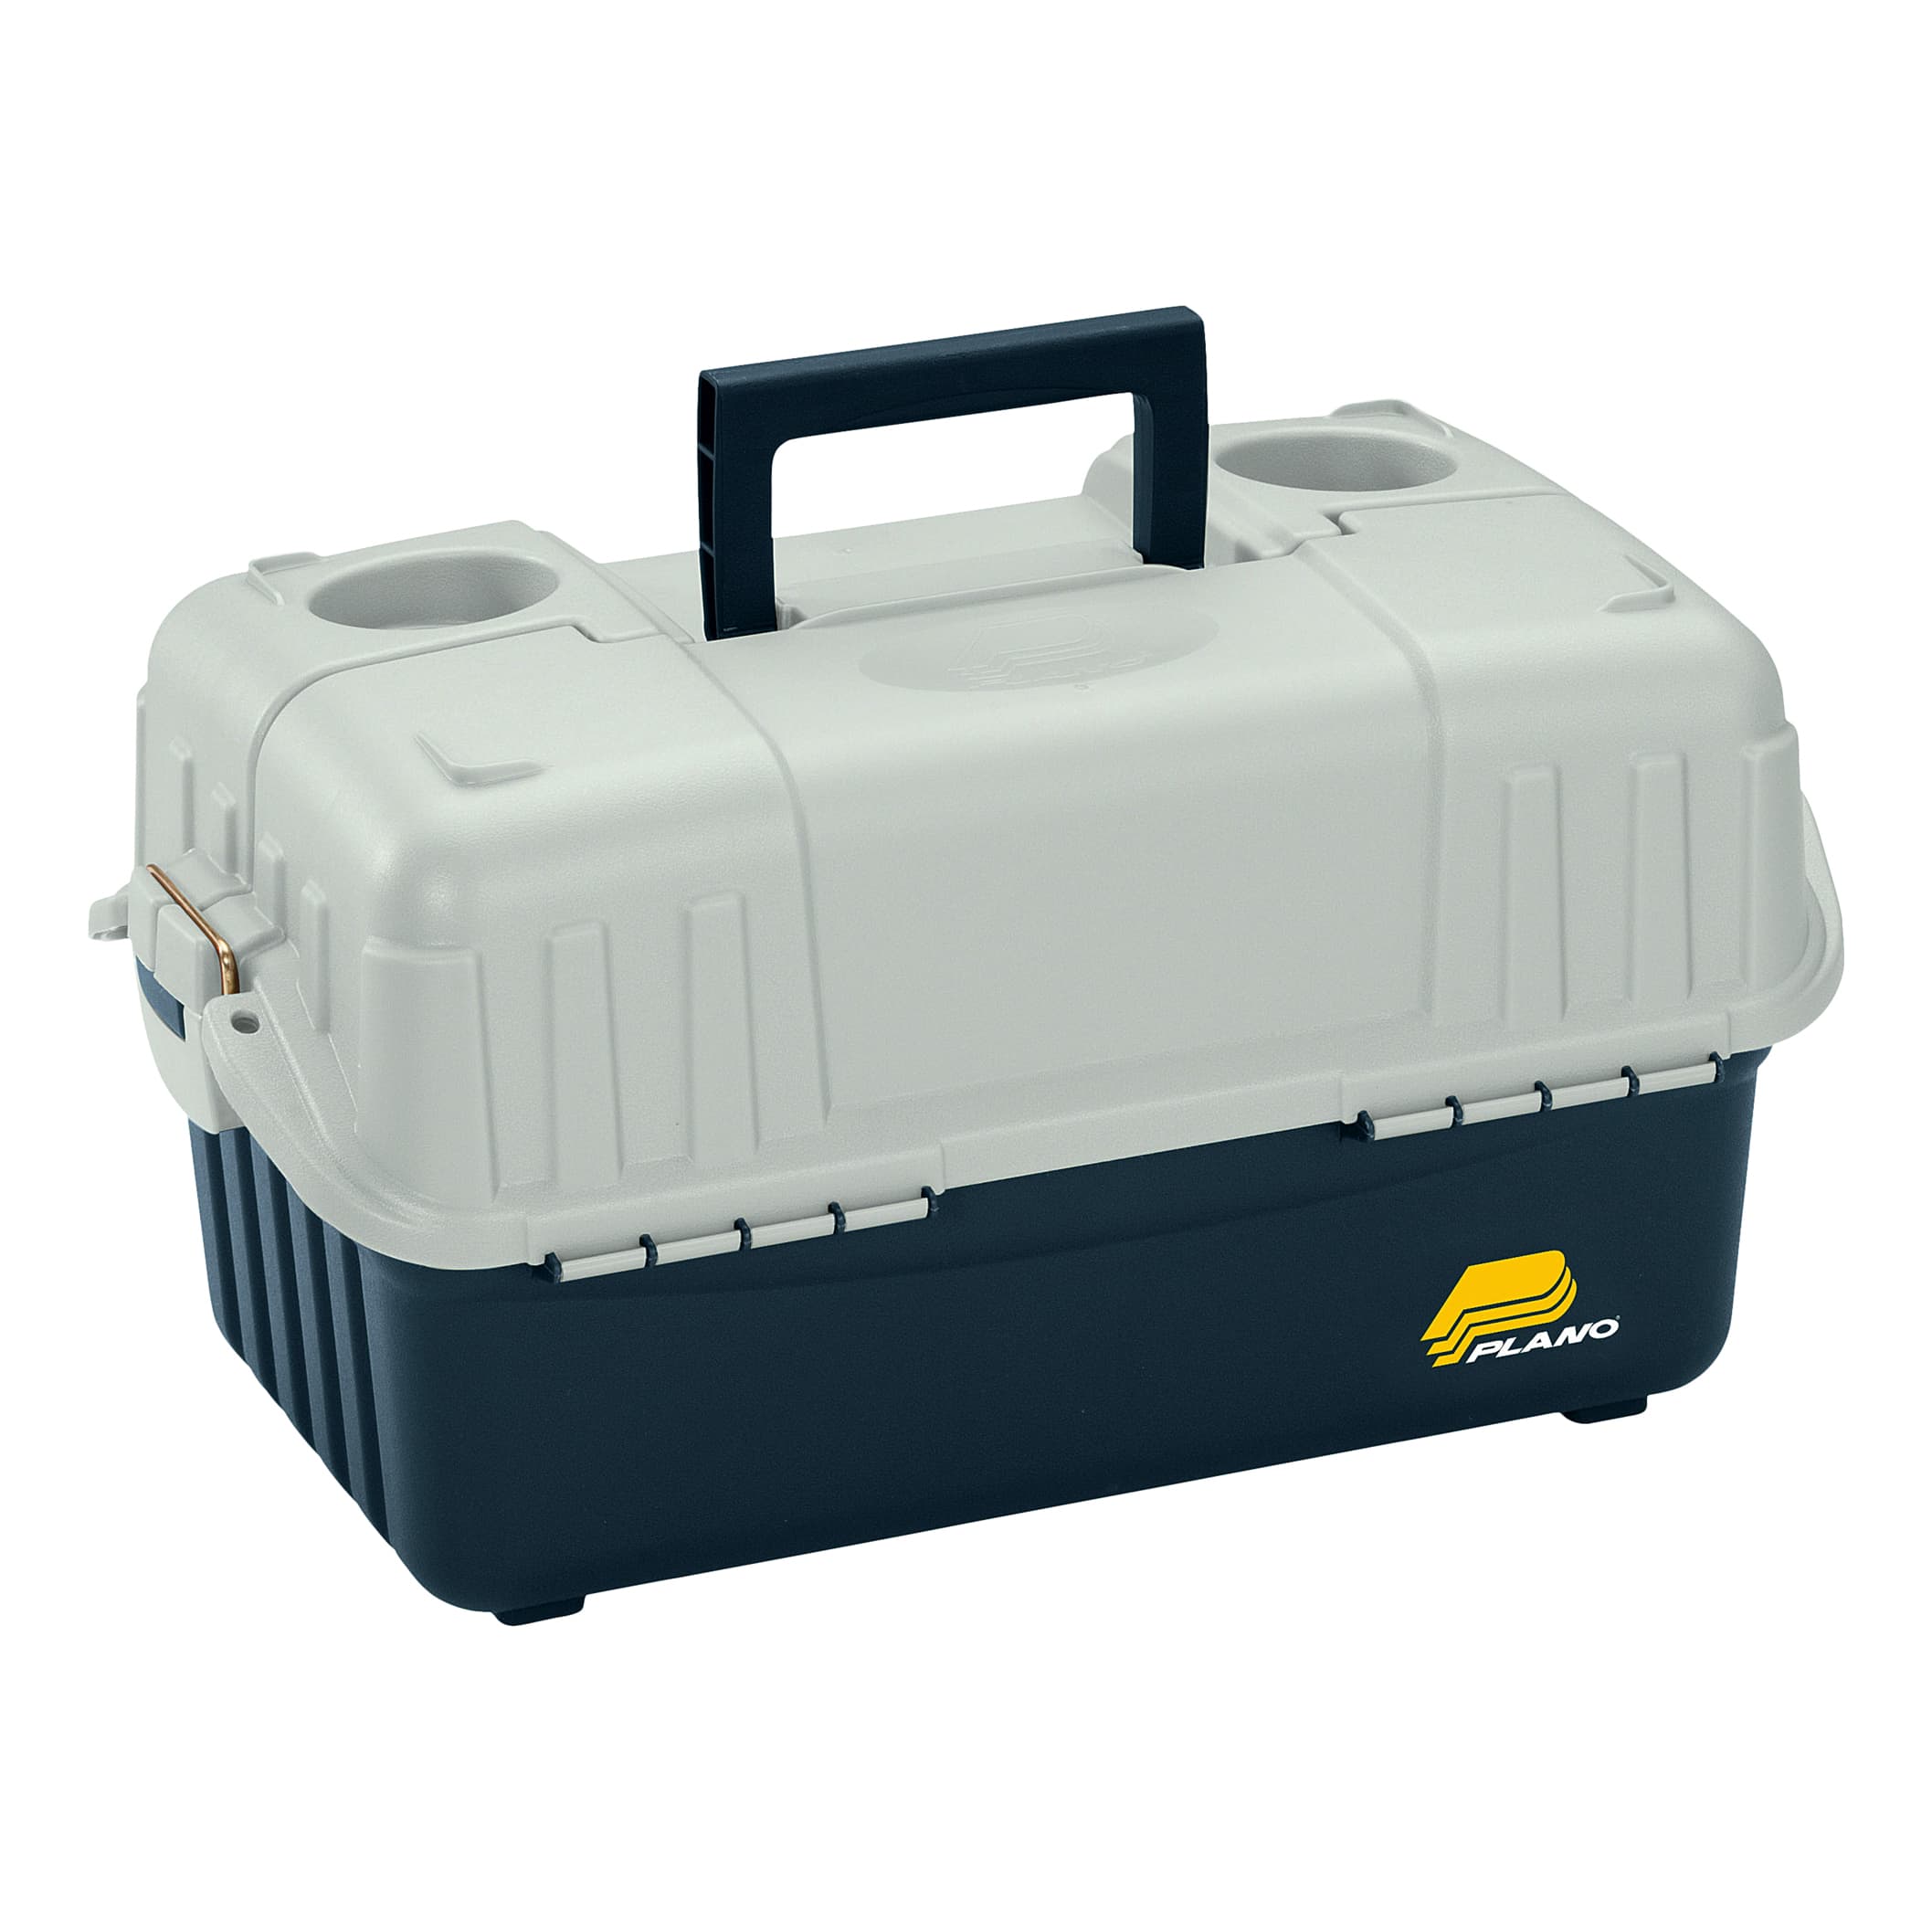 Plano 5630 Fishing Tackle Box. With Fishing Lure, Equipment, Tools.